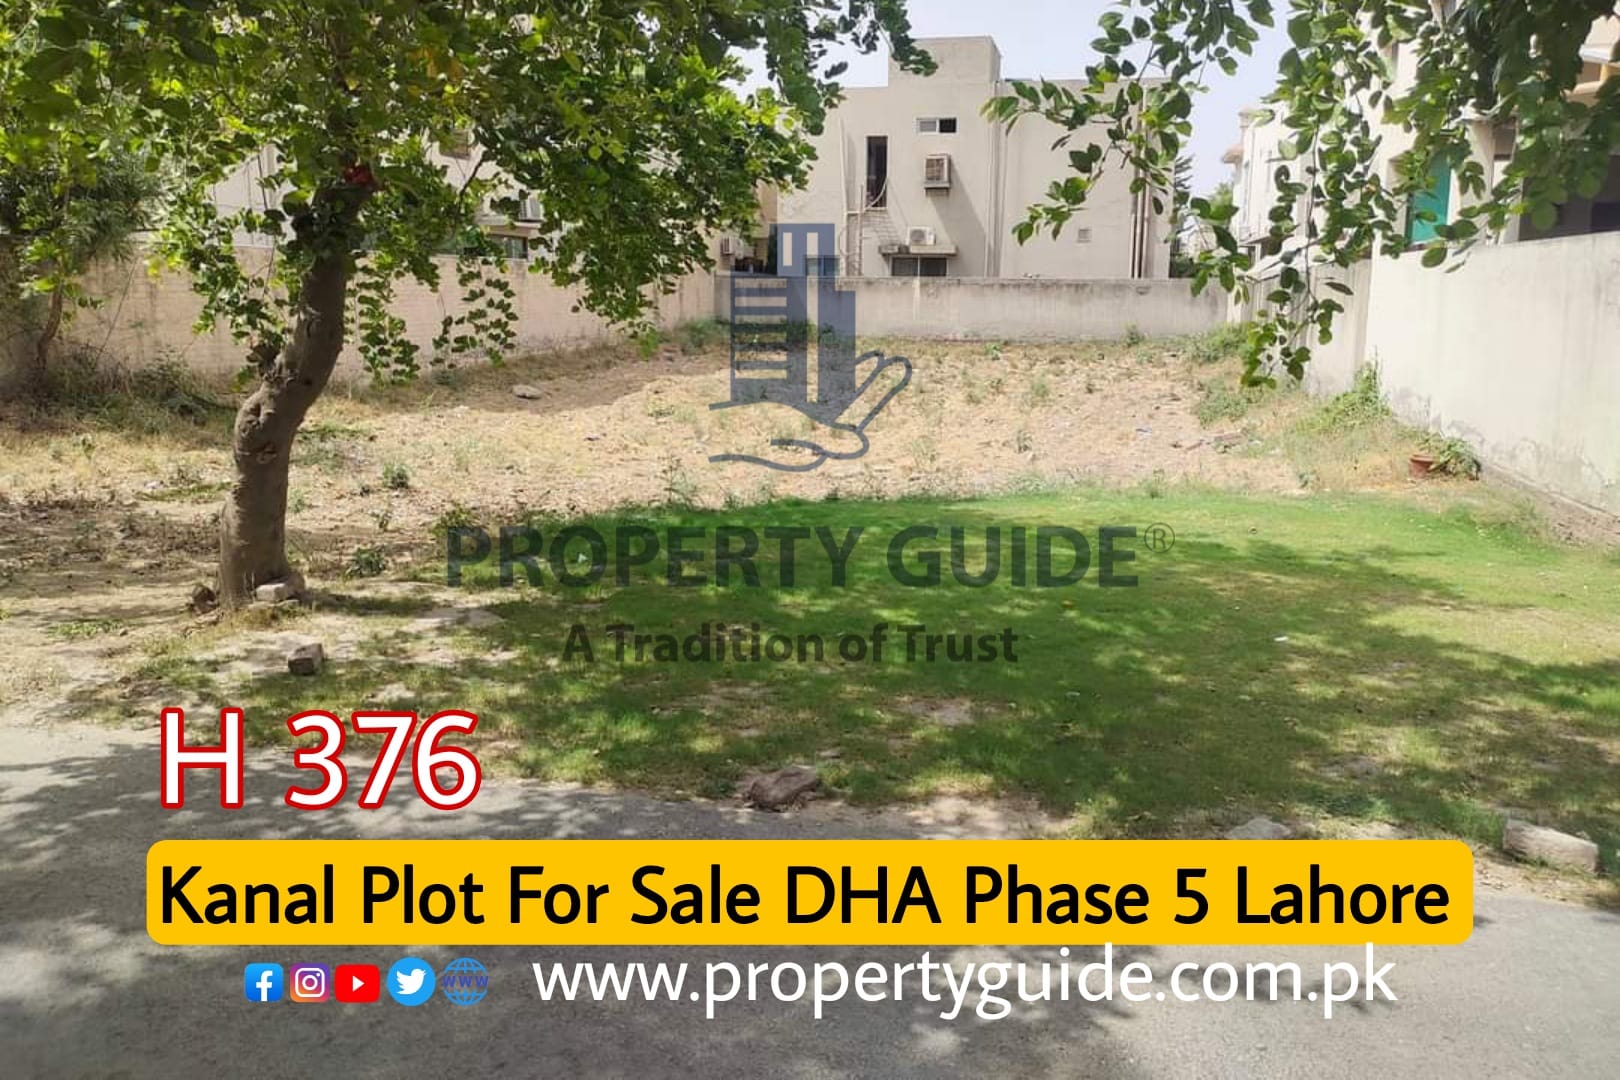 DHA Phase 5 Lahore Plots For Sale